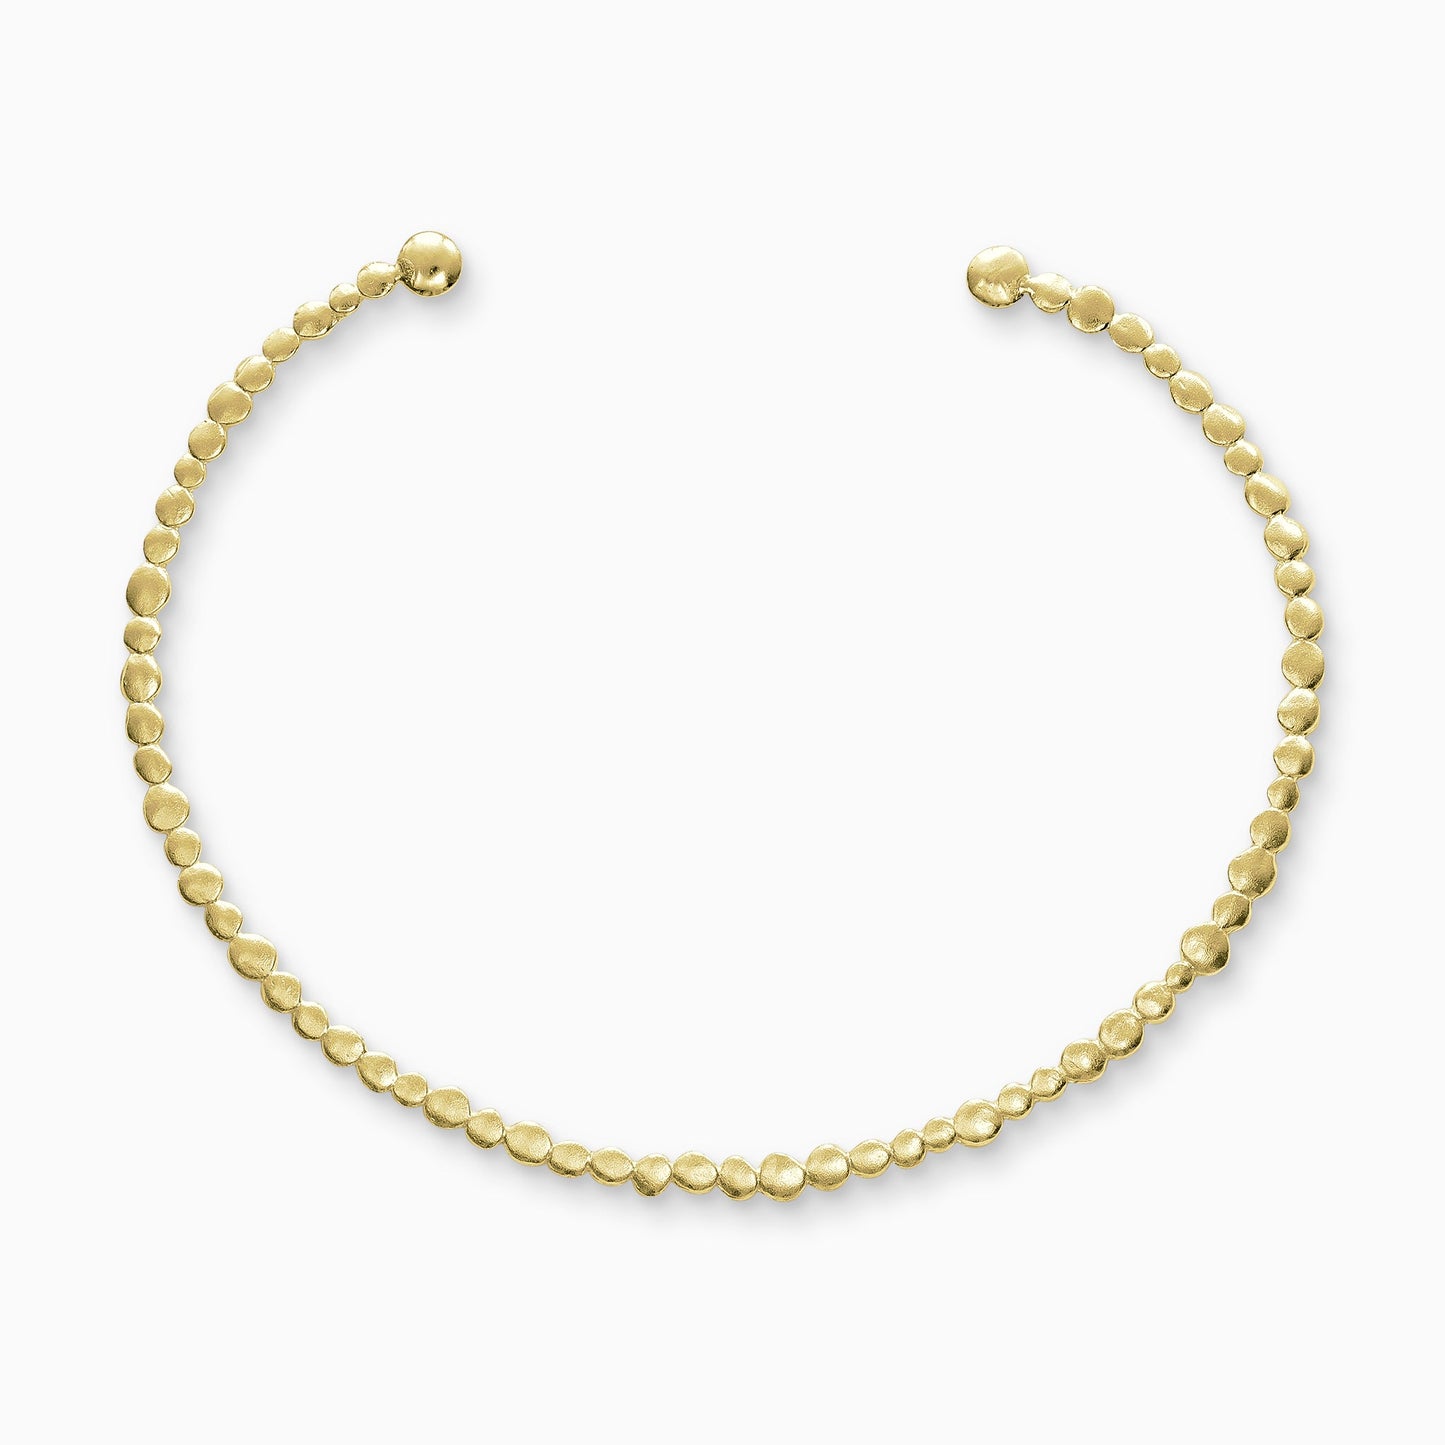 18ct Fairtrade yellow gold collar. A line of dainty textured dots of gold in varying sizes form a collar worn close to the neck. Open ended to enable taking on and off. 125mm x 100mm